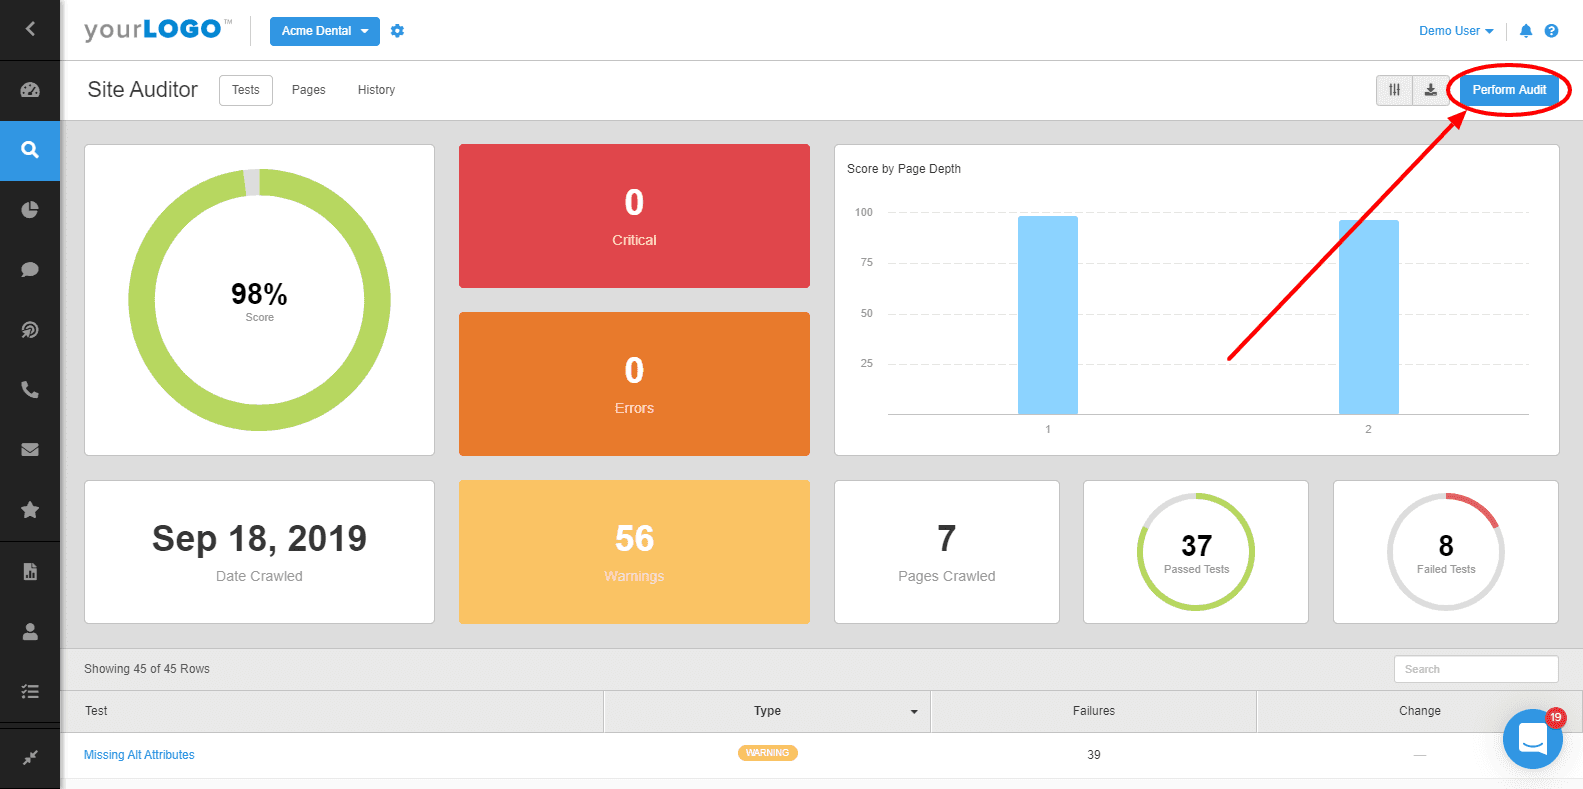 Site auditor dashboard